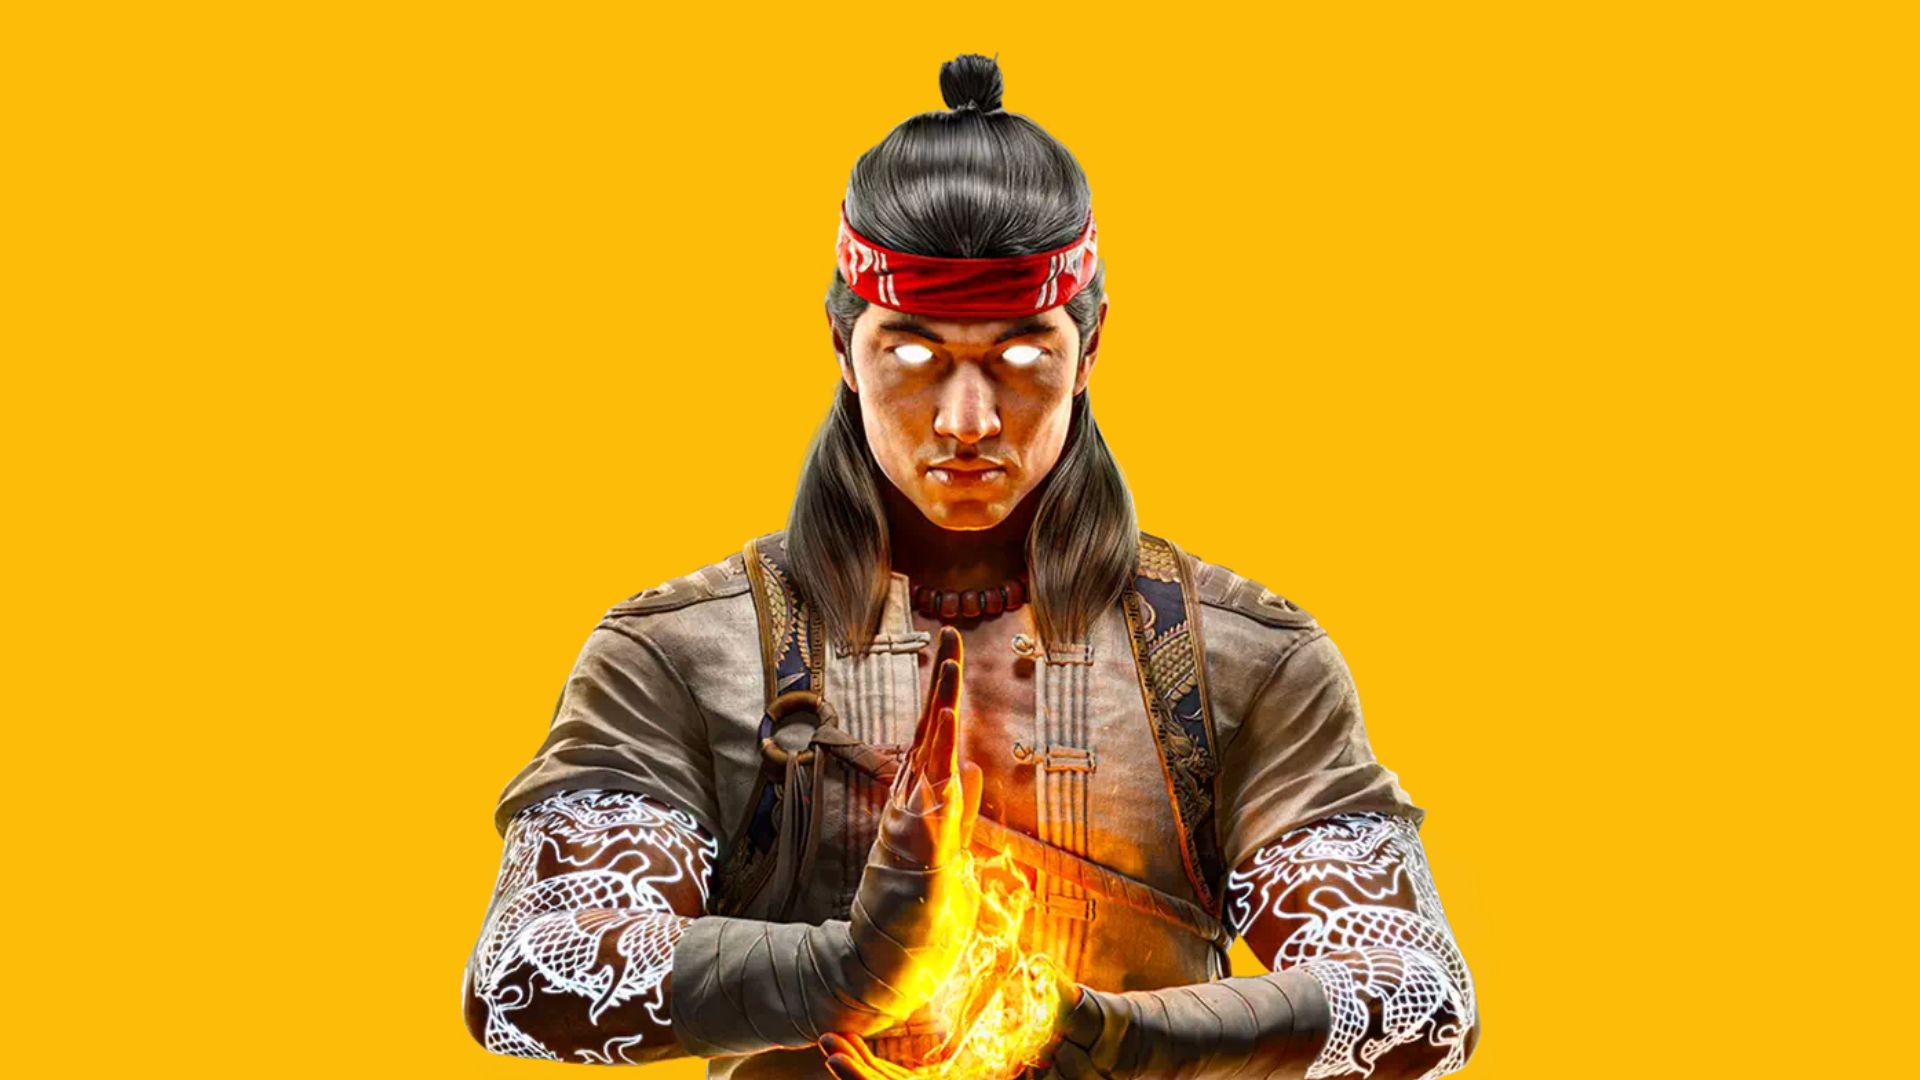 Mortal Kombat 1 release date - Mortal Kombat character with hands together as if in prayer. He has his hair tied in a bun, dead white eyes, and a red headband. Fire comes off of his touching hands.